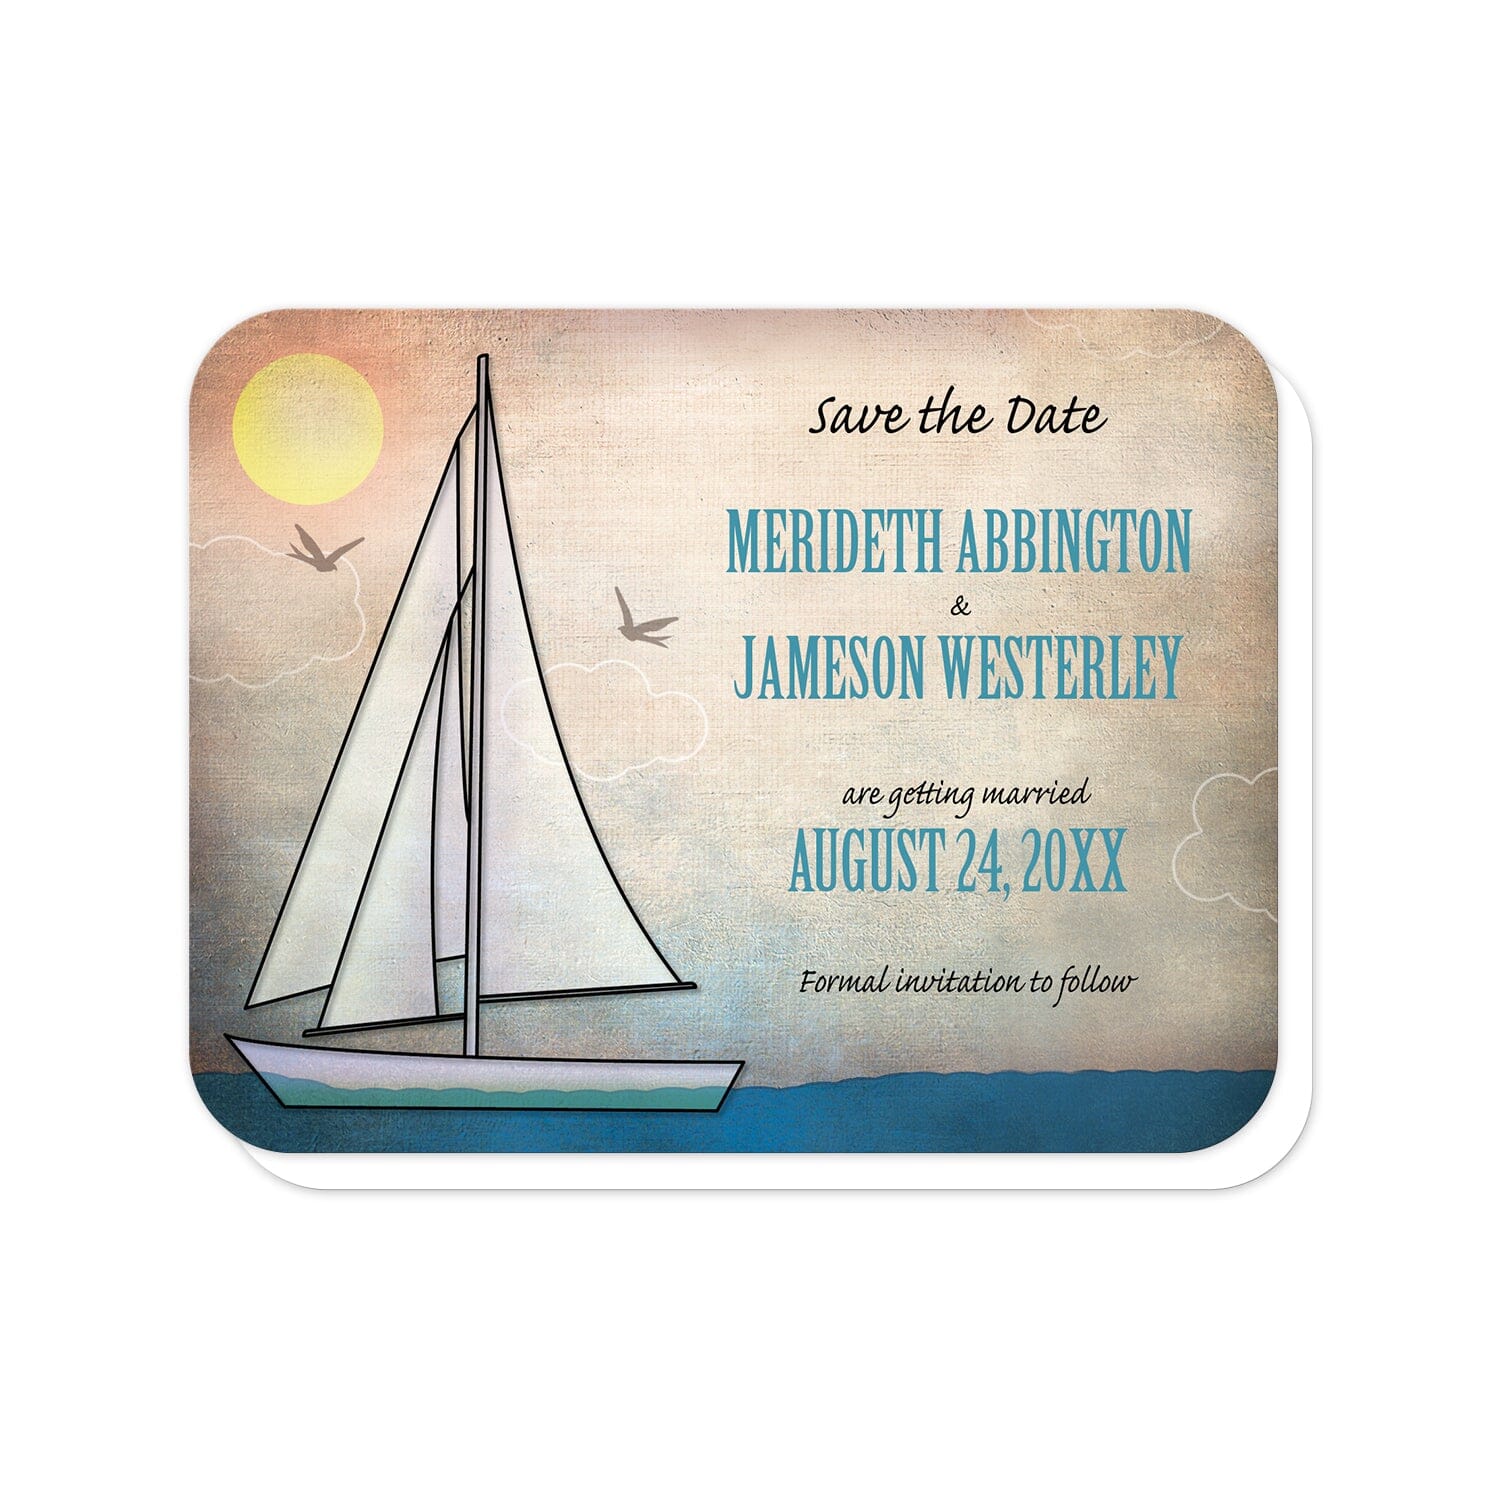 Rustic Sailboat Nautical Save the Date Cards (with rounded corners) at Artistically Invited. Rustic sailboat nautical save the date cards designed with an illustration of a sailboat on the water with the sun in the corner and two bird silhouettes around the boat. Your personalized wedding date details are custom printed in blue and black over the rustic canvas background design.